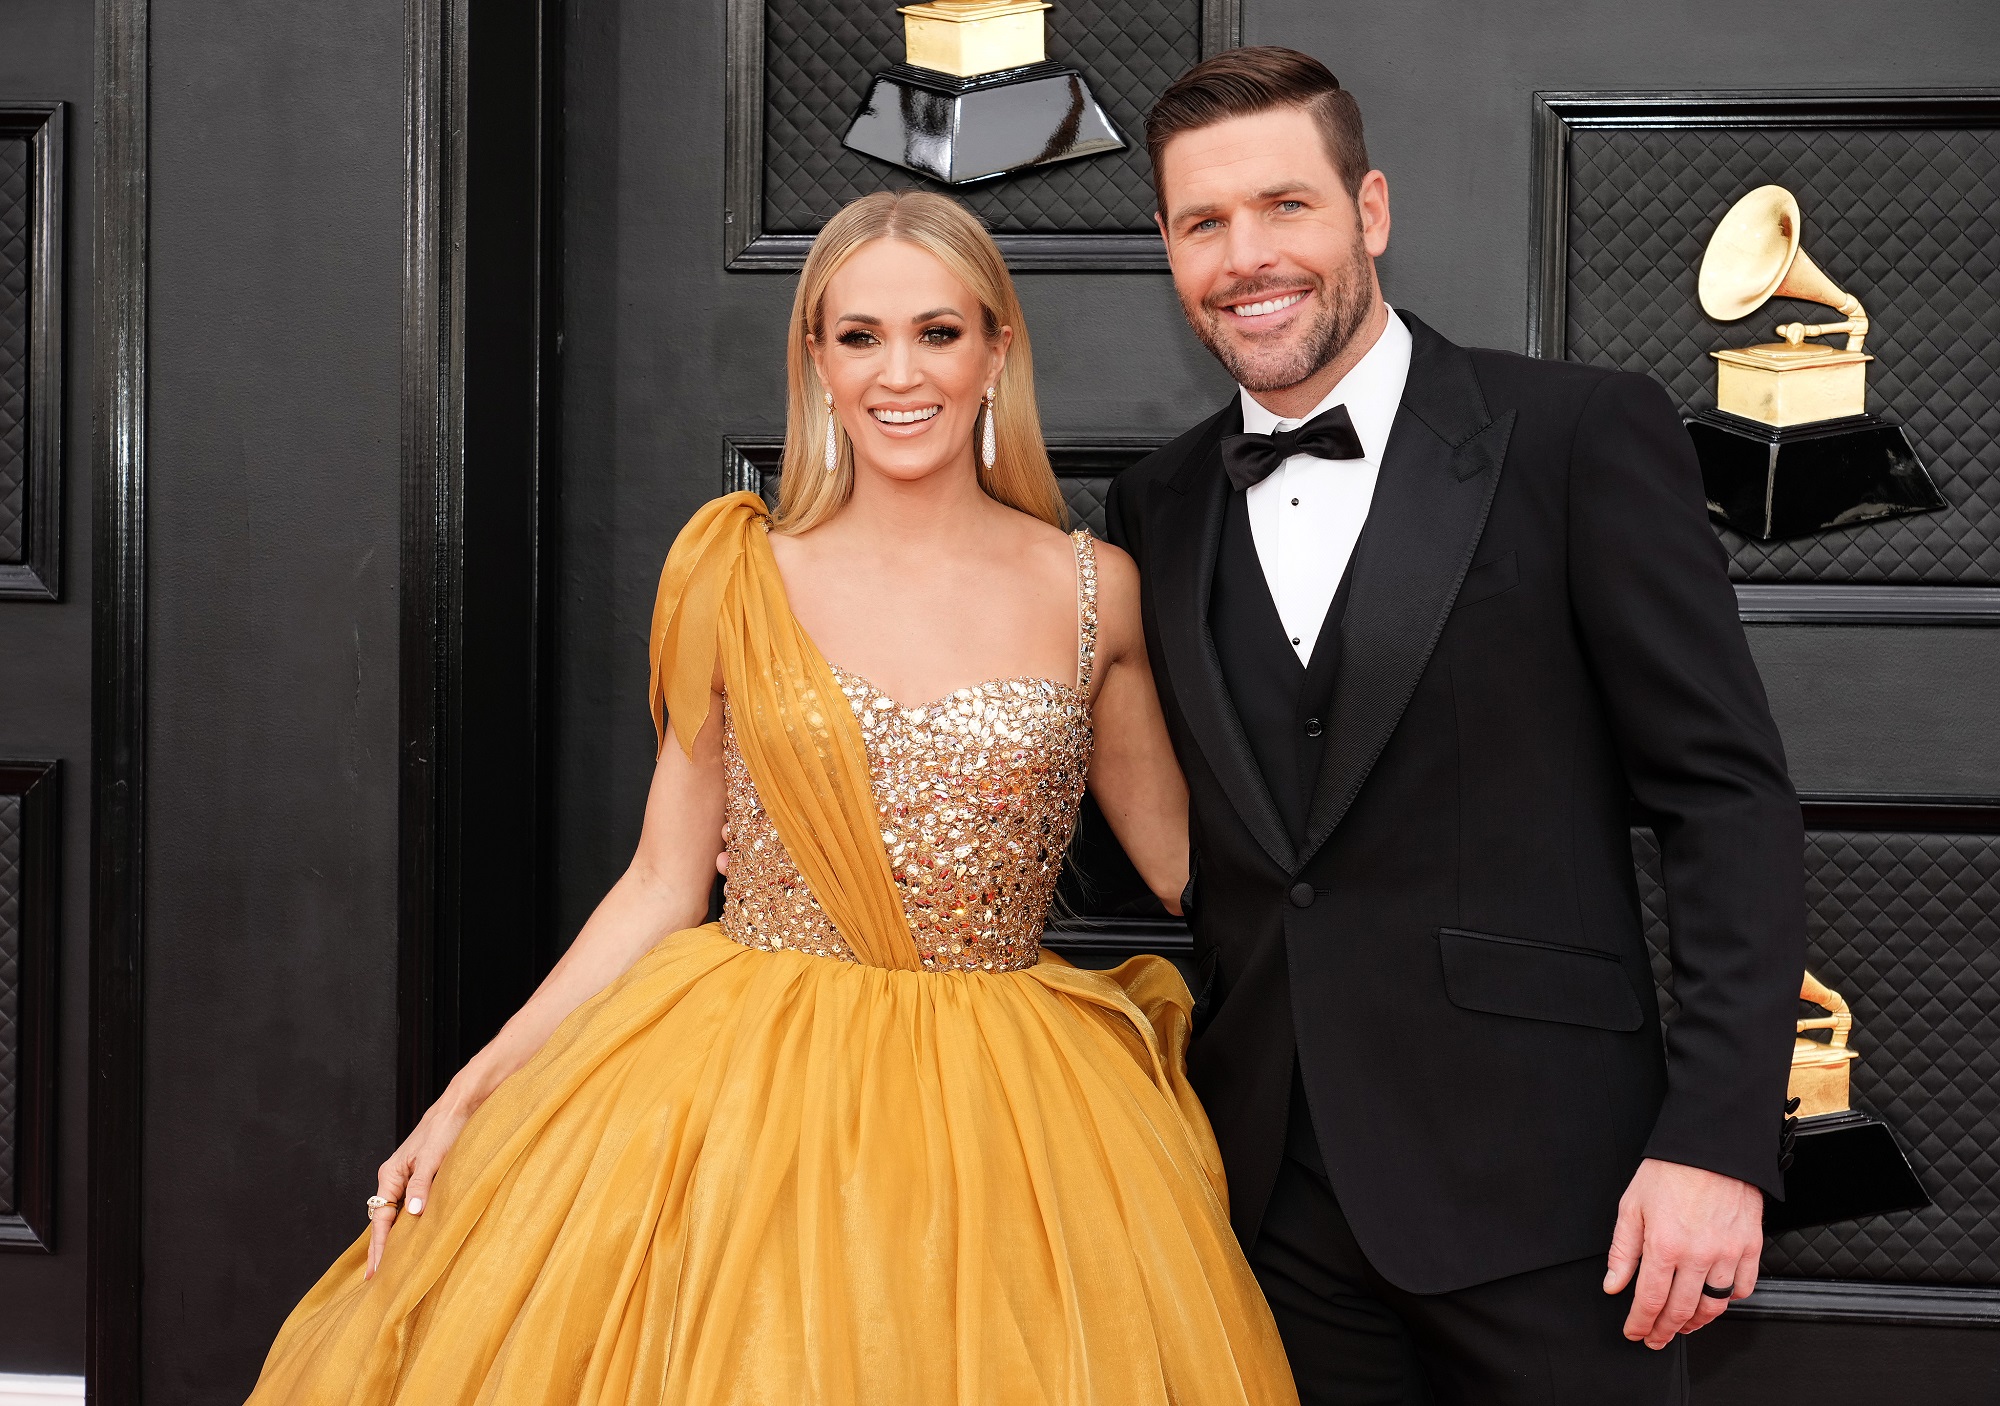 Carrie Underwood in an orange and glittery dress standing with Mike Fisher in a black tux